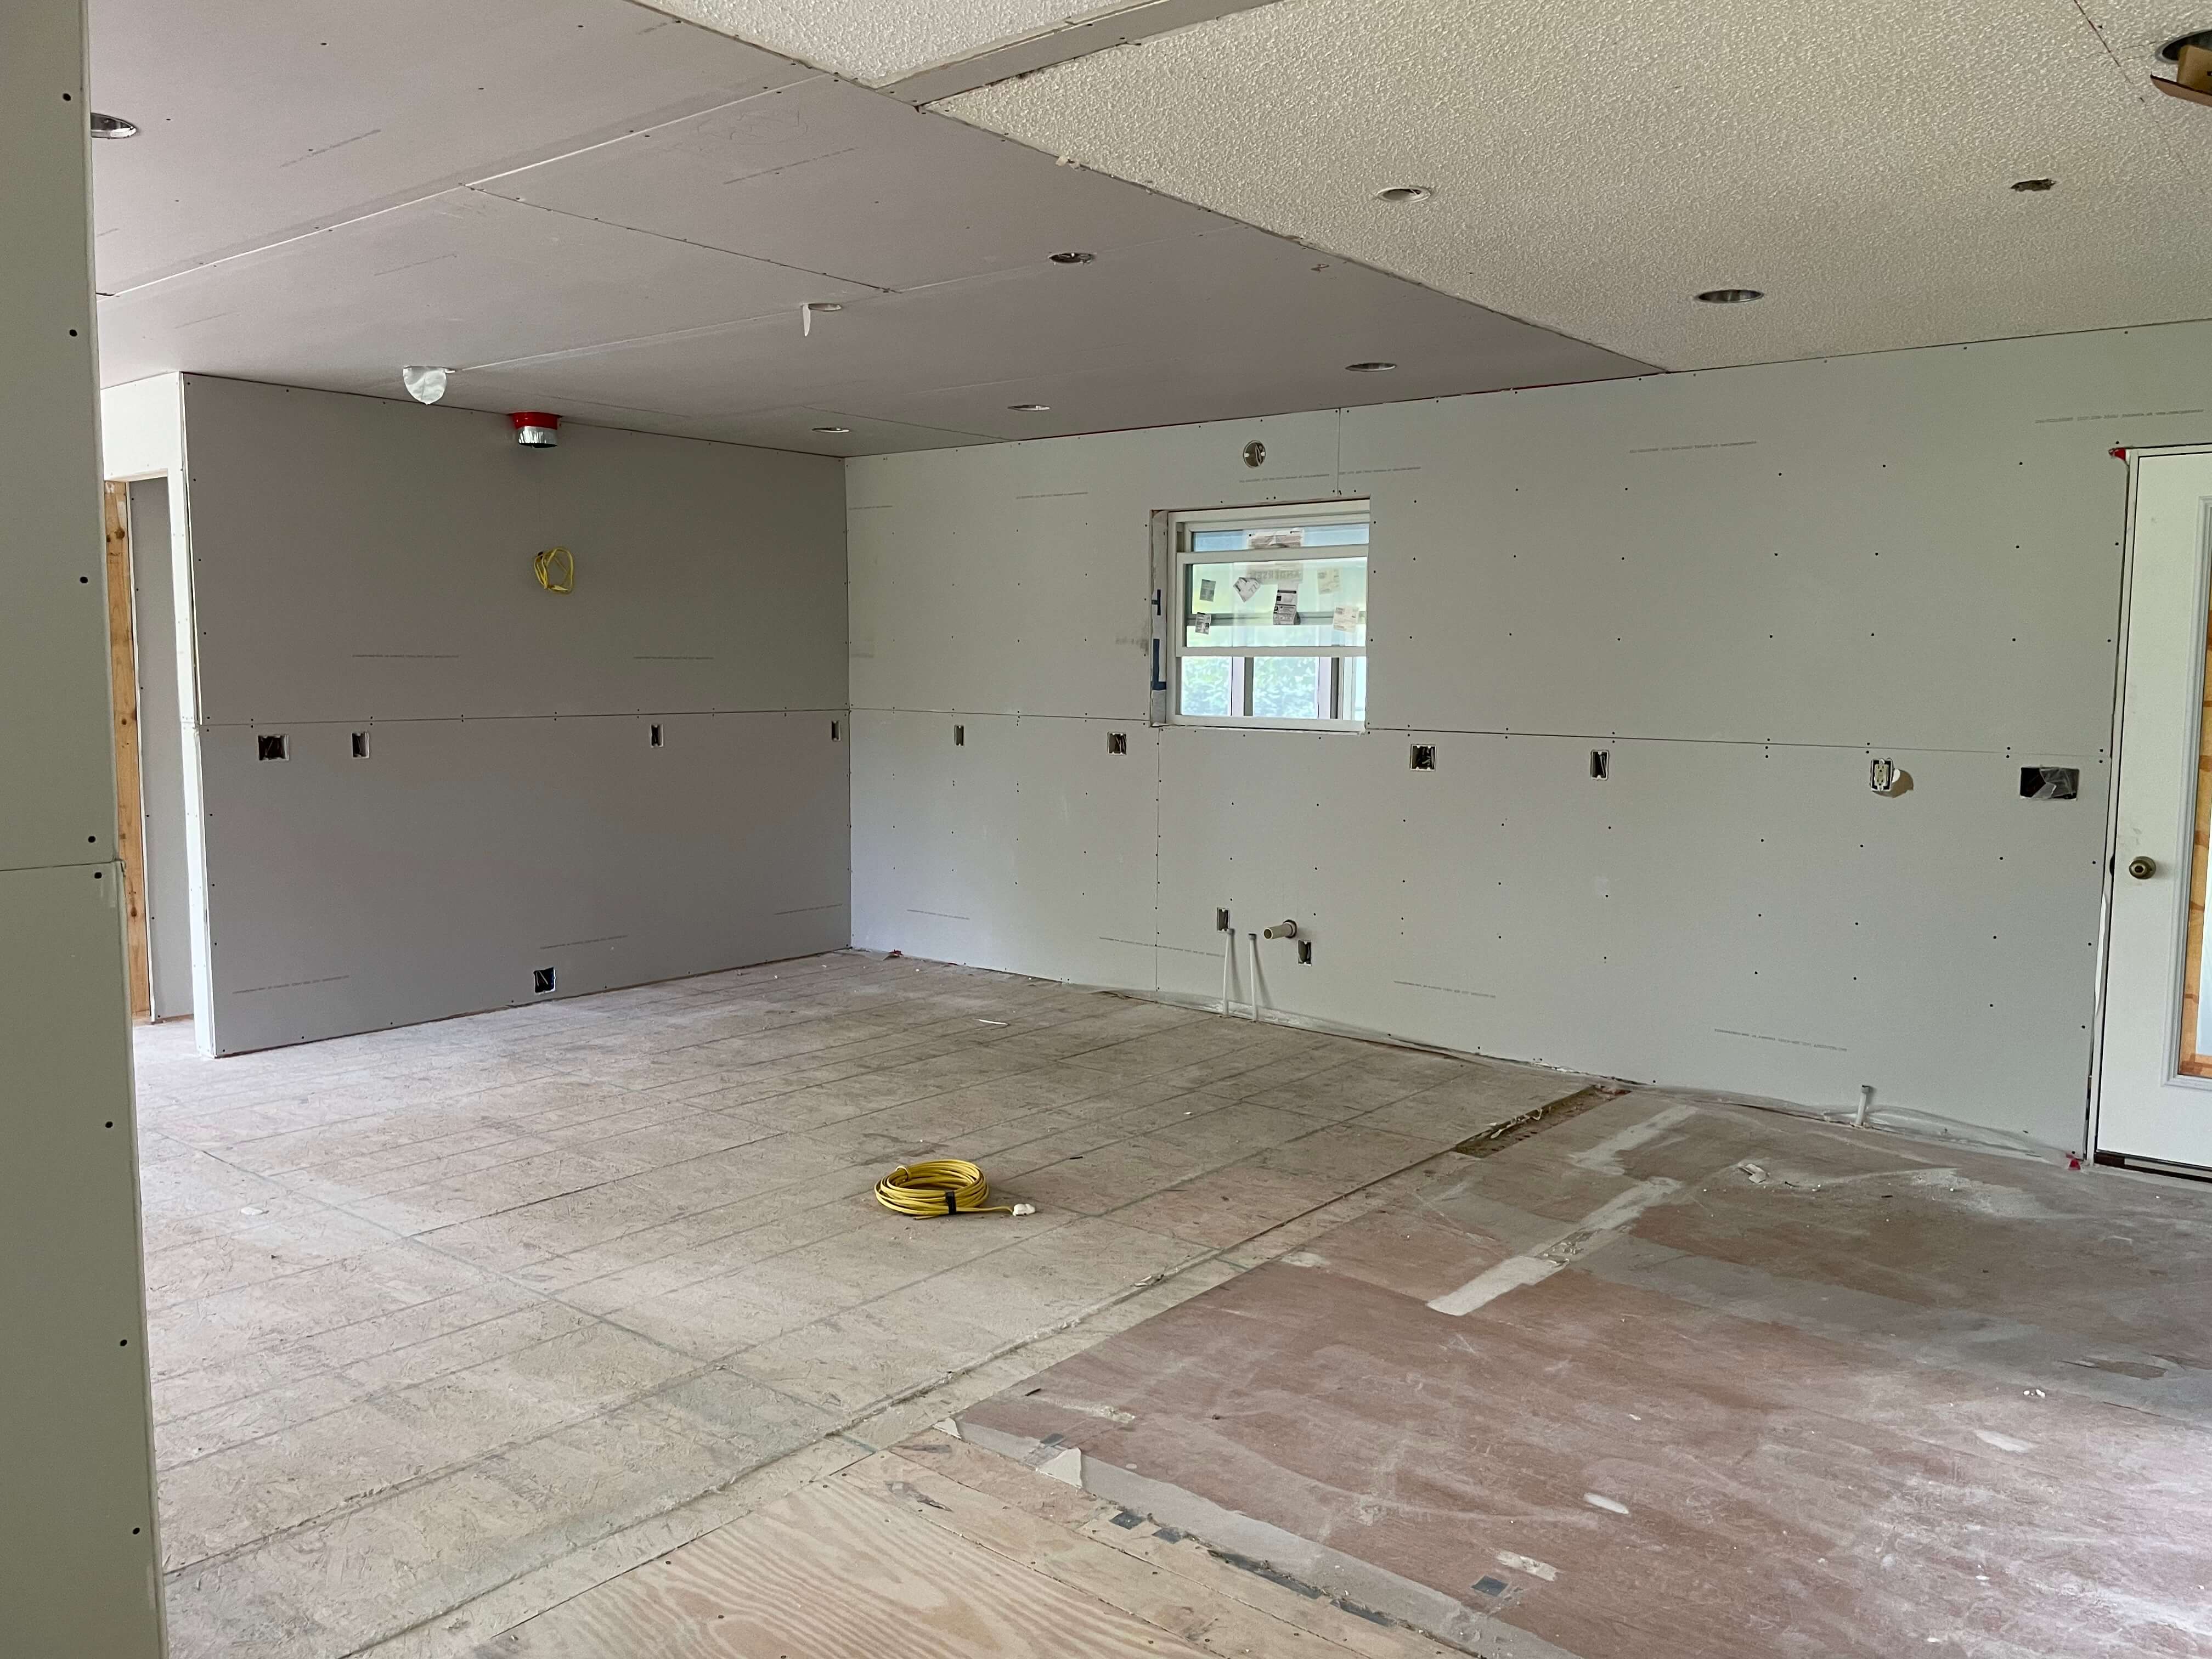 The new drywall during the renovation and addition to the home.